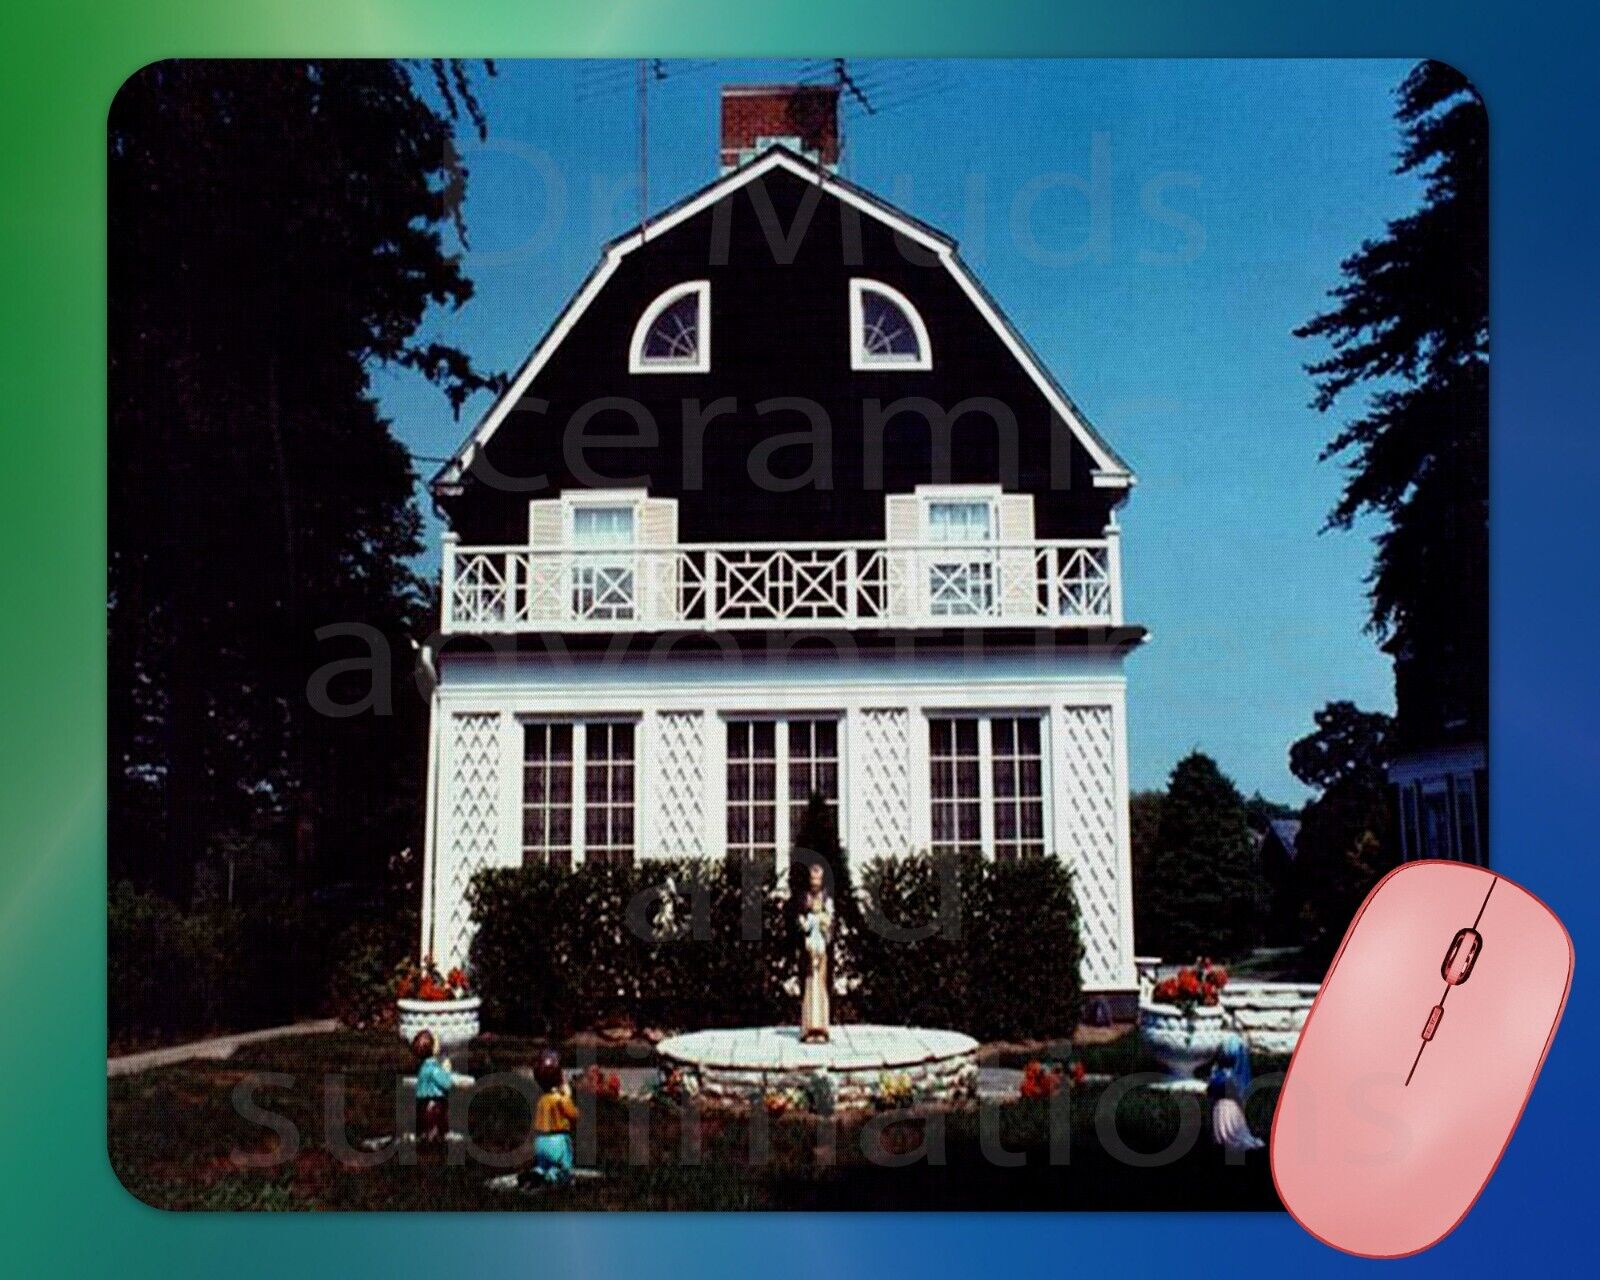 The Amityville Horror House mouse pad